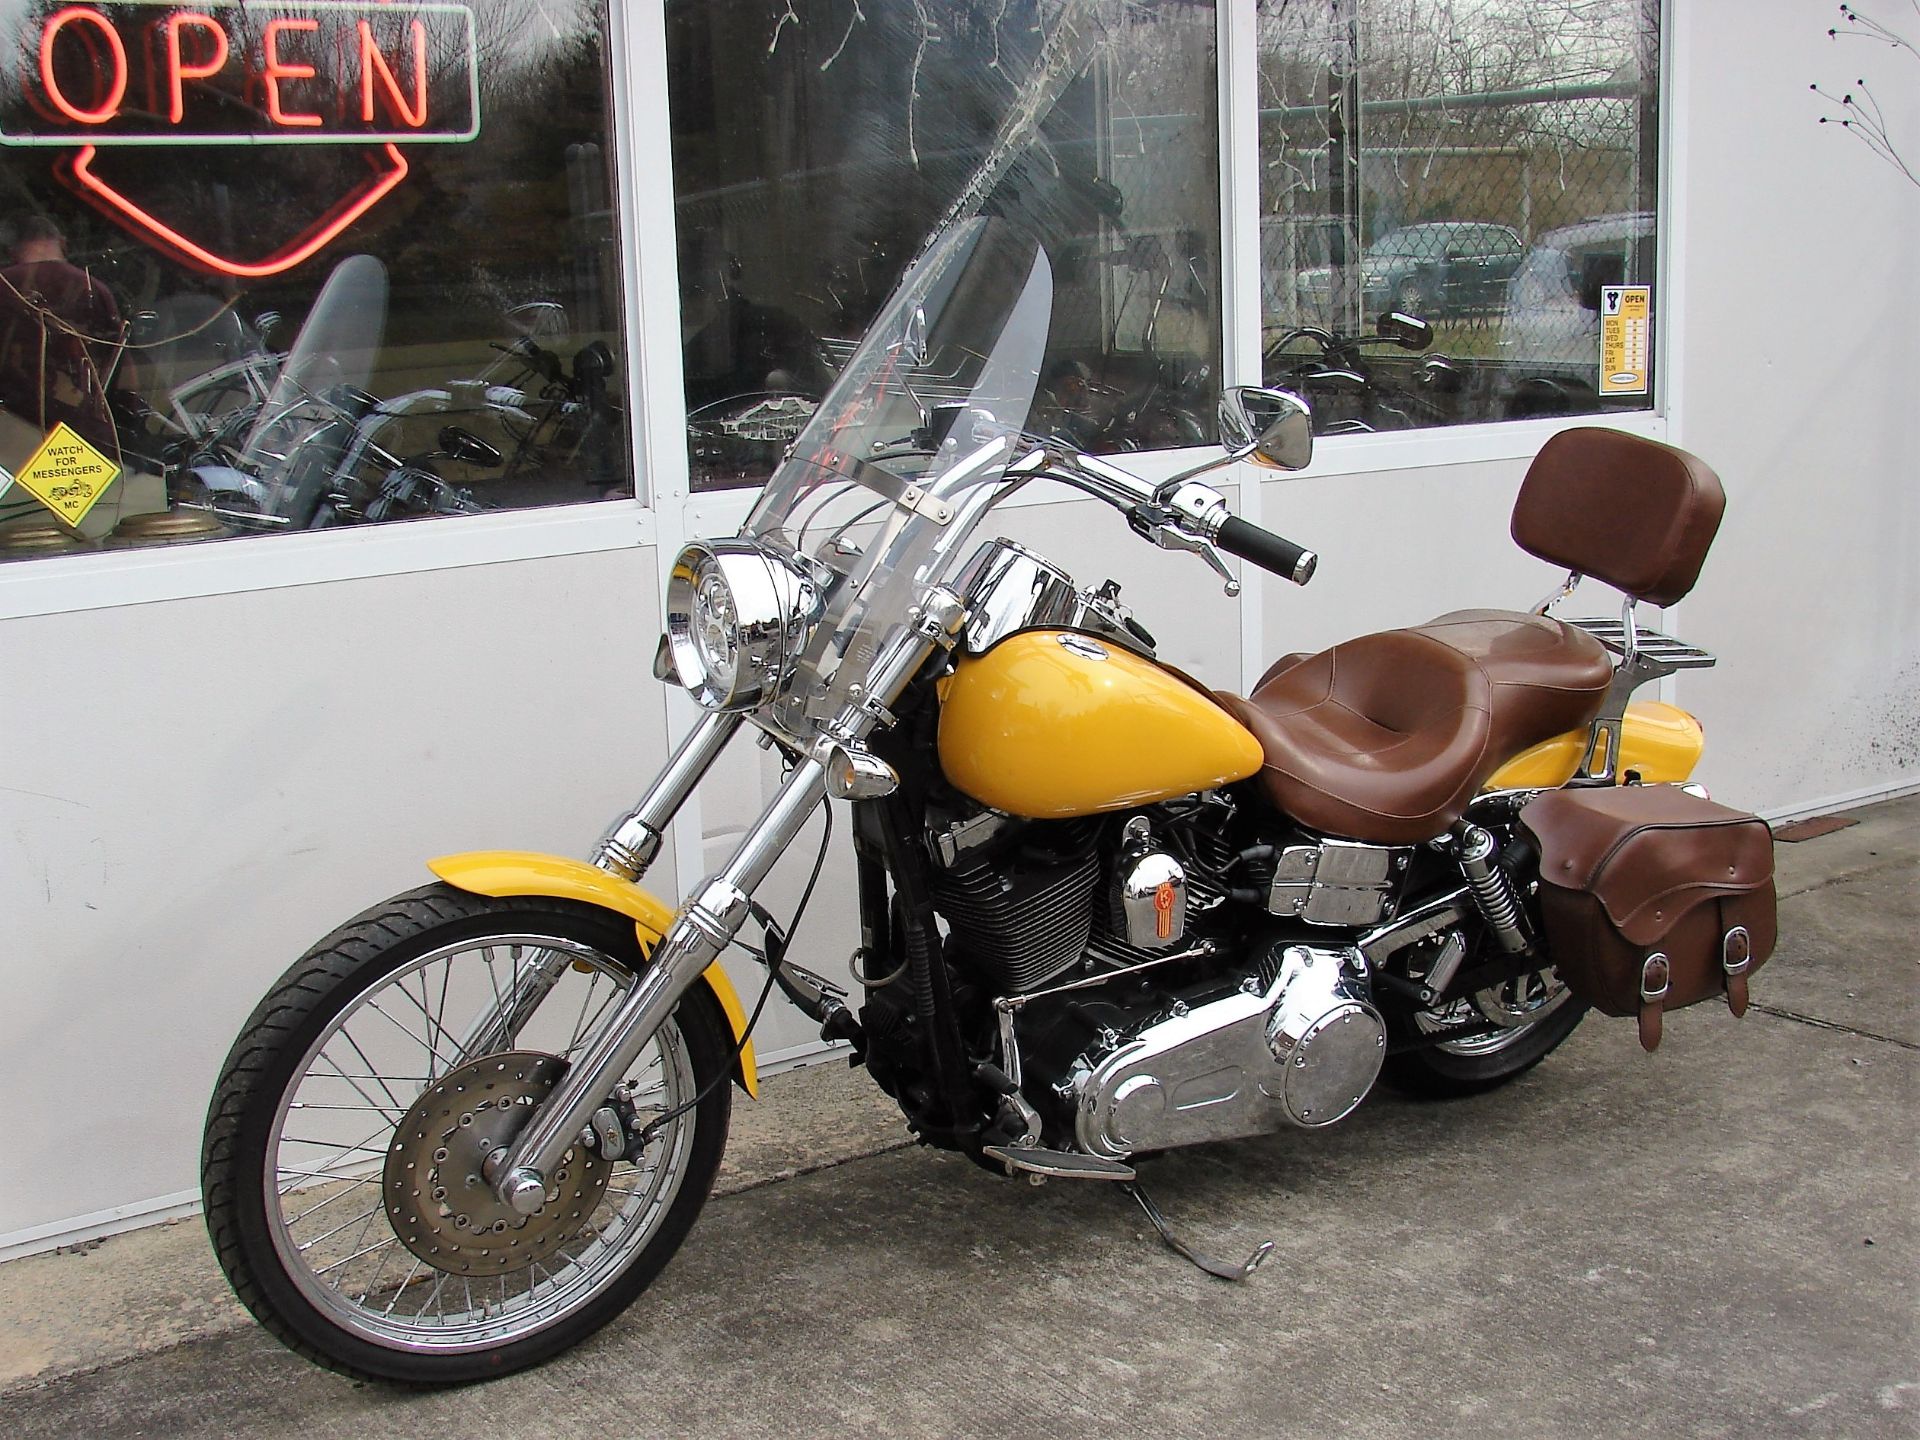 2007 Harley-Davidson FXDWG Dyna Wide Glide in Williamstown, New Jersey - Photo 8